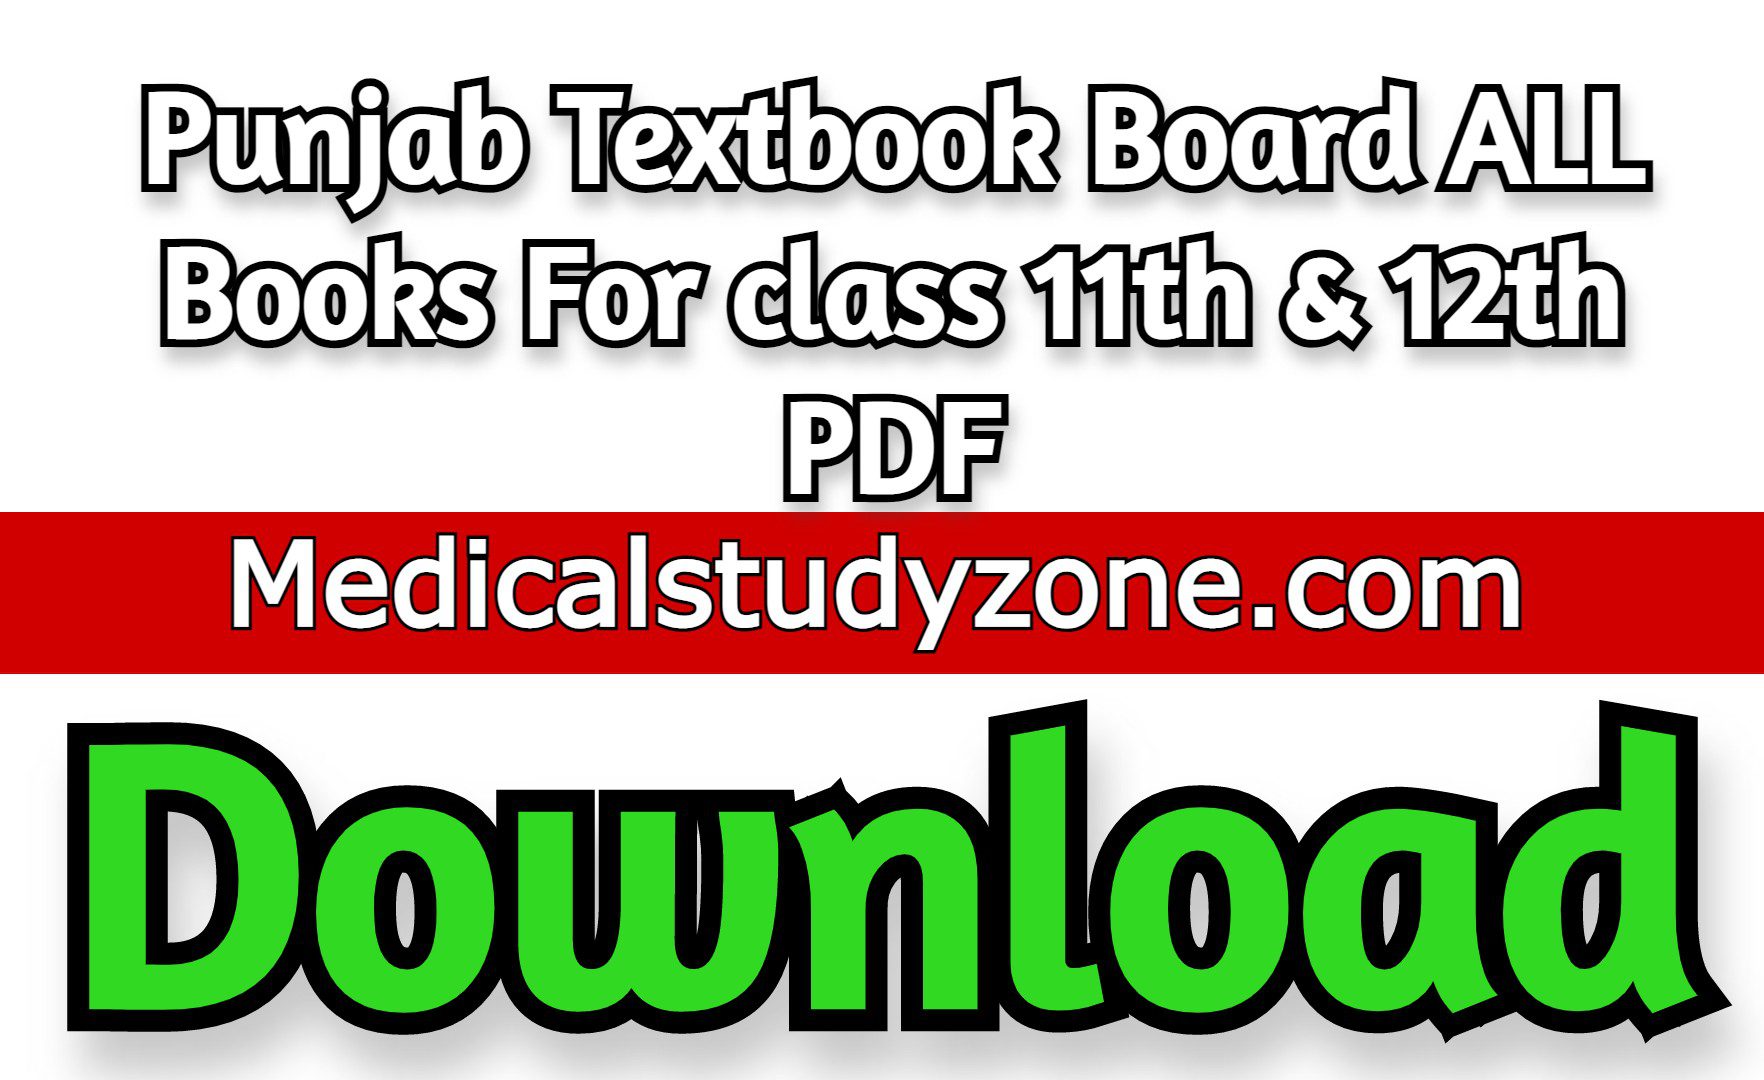 Punjab Textbook Board ALL Books For class 11th & 12th PDF 2021 Free Download